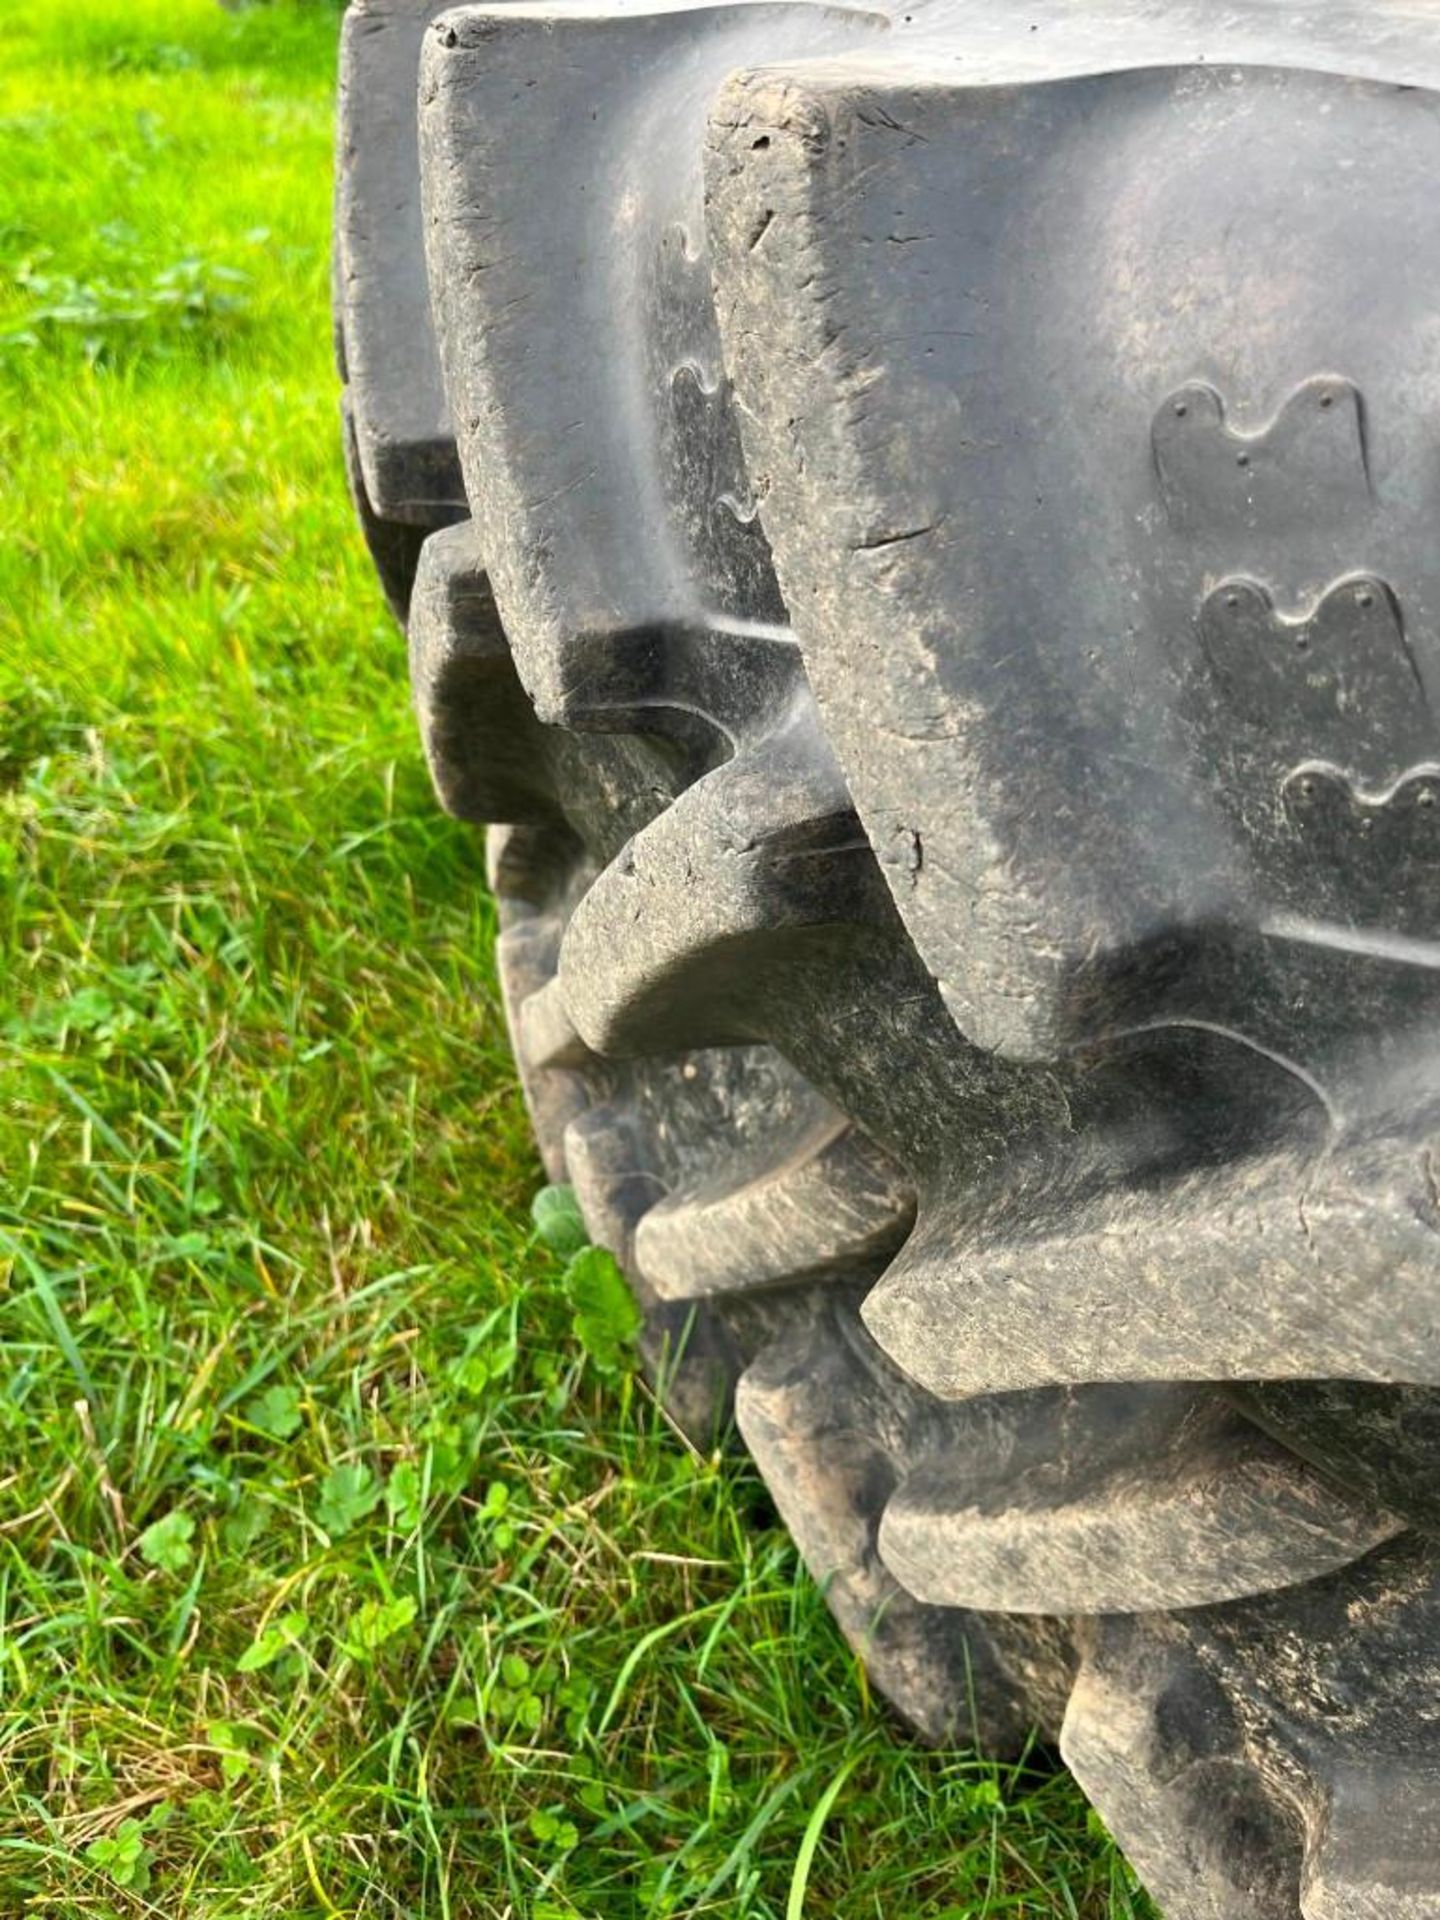 Set of Massey Ferguson Row Crop Wheels and Tyres, Tyres: Rear BKT 320/90 R50, Front: BKT 320/85 R34 - Image 5 of 6